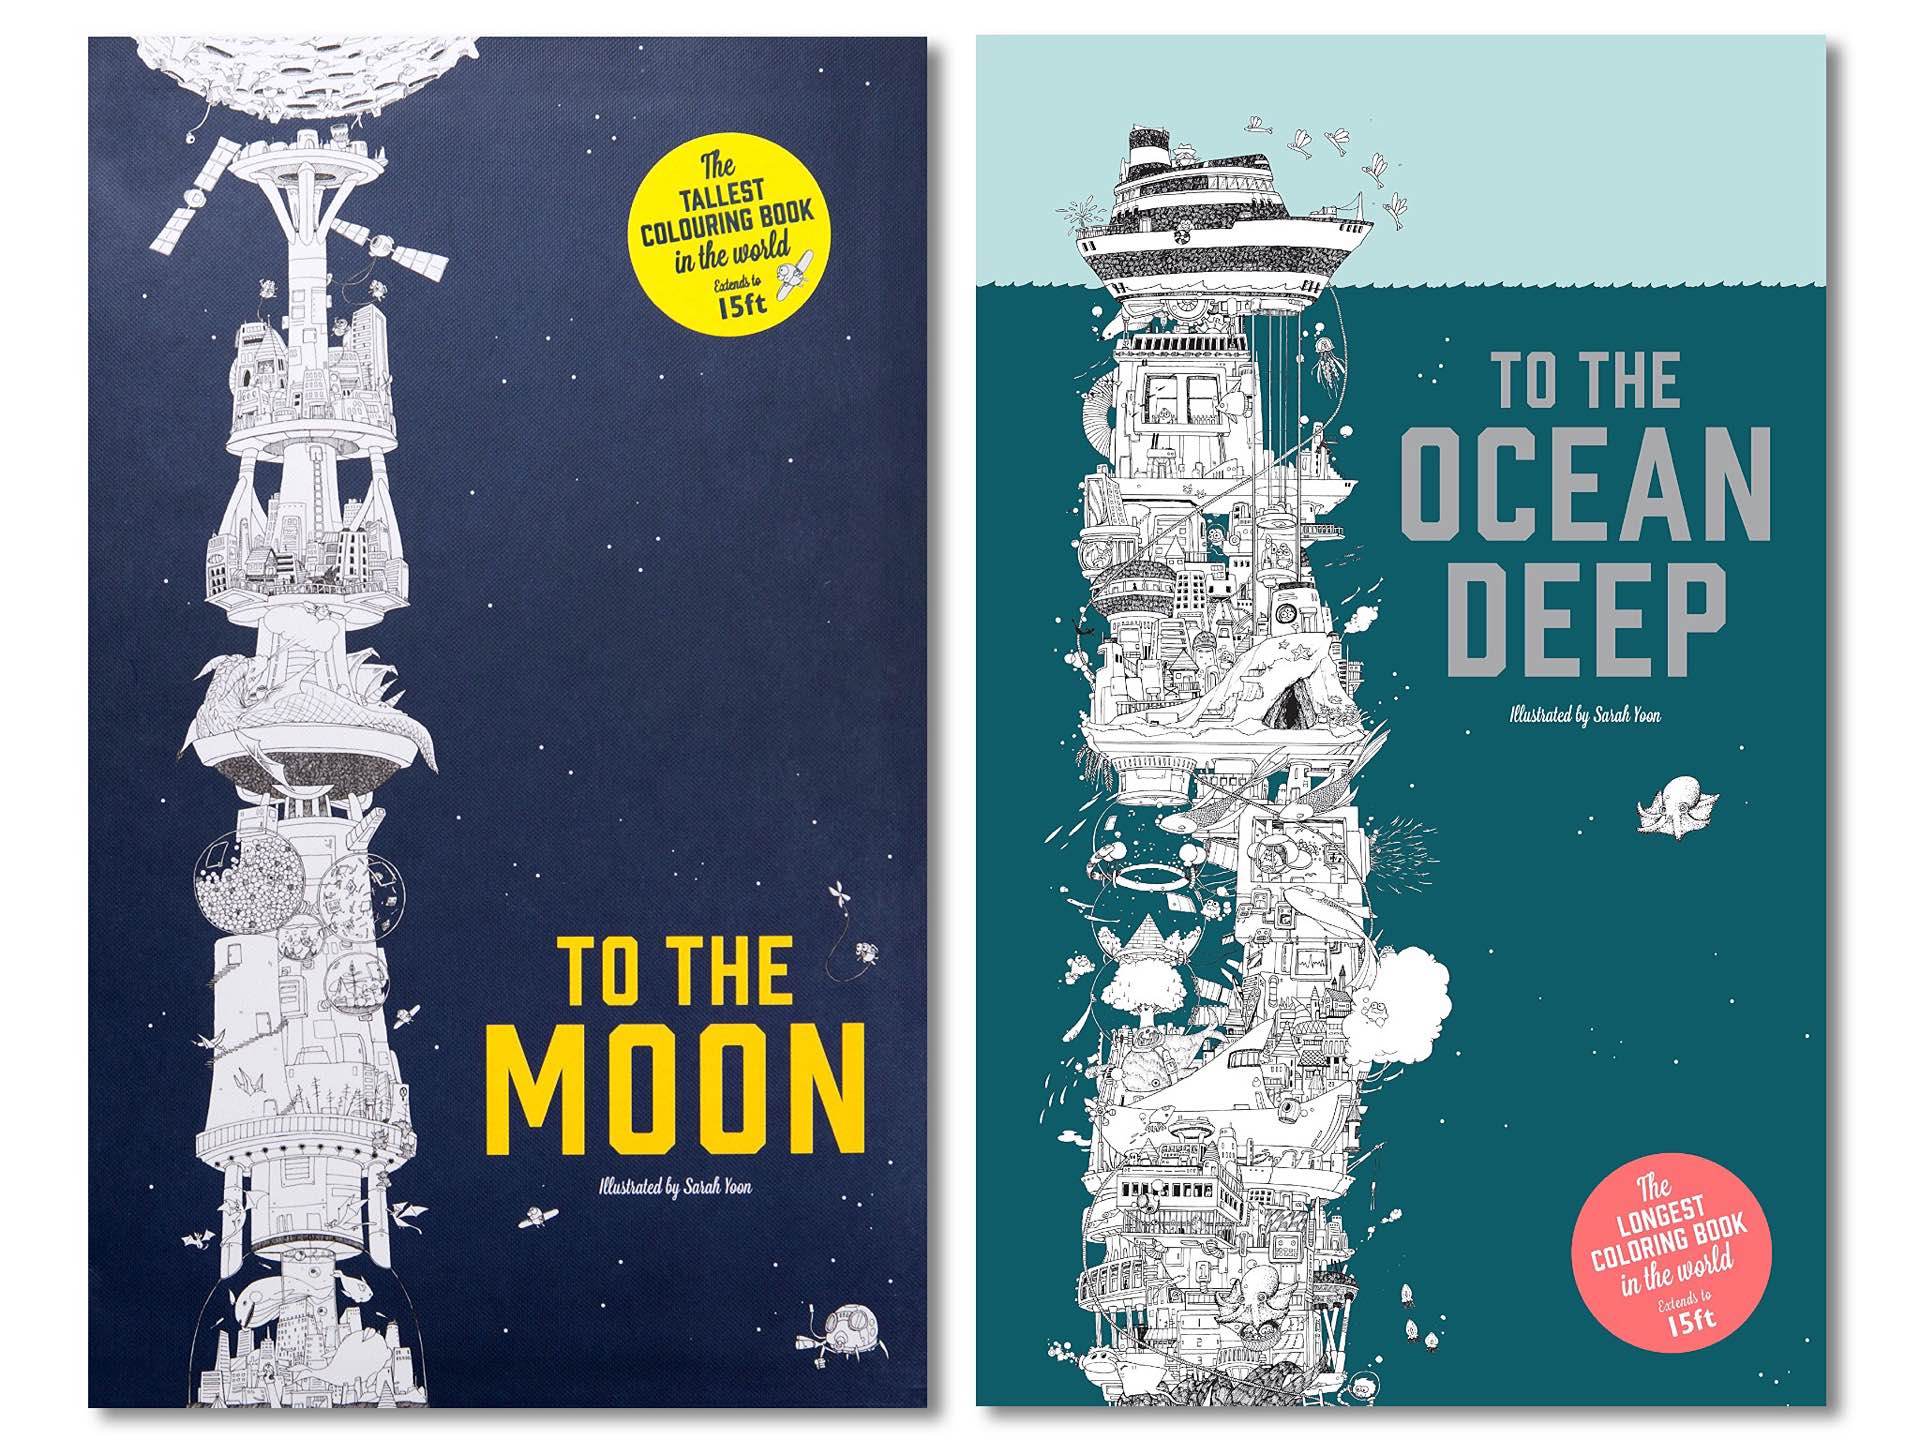 "To the Moon" and "To the Ocean Deep" Coloring Books by